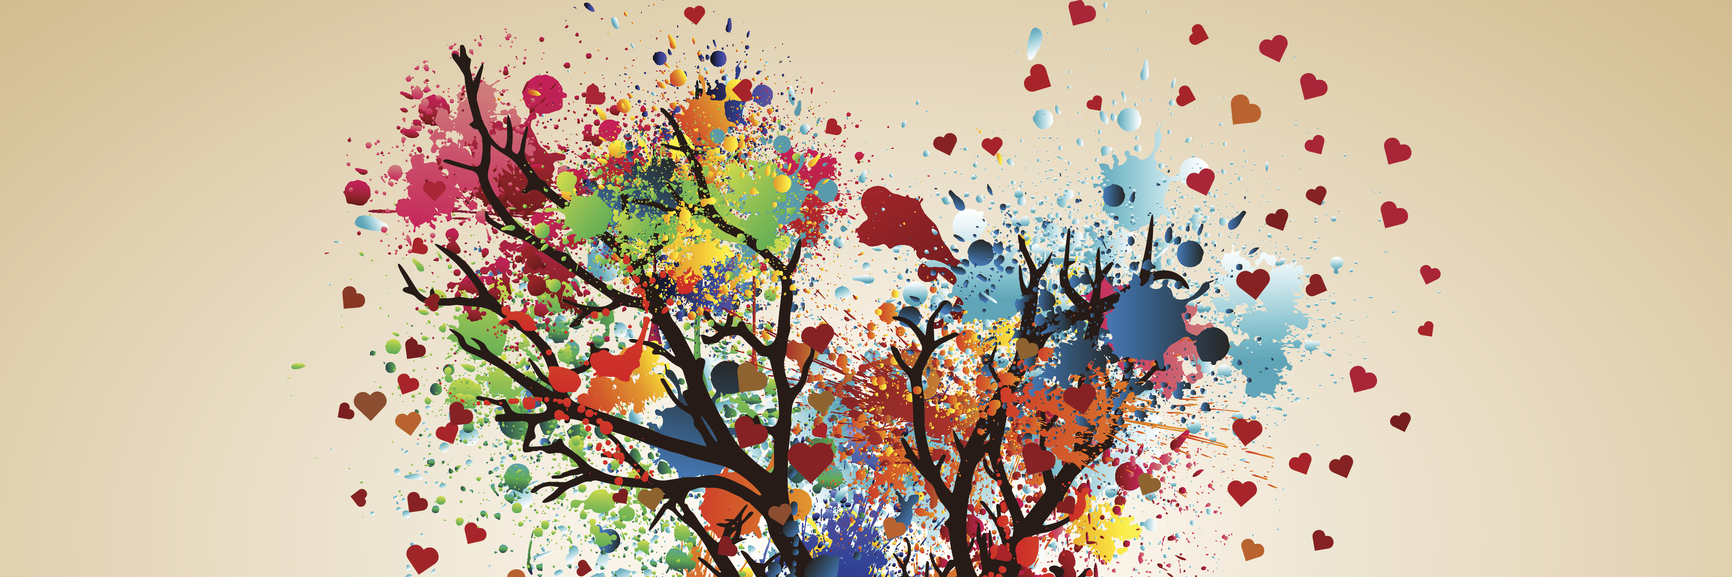 Illustration of heart-shaped tree with leaves represented by splashes of paint and hearts